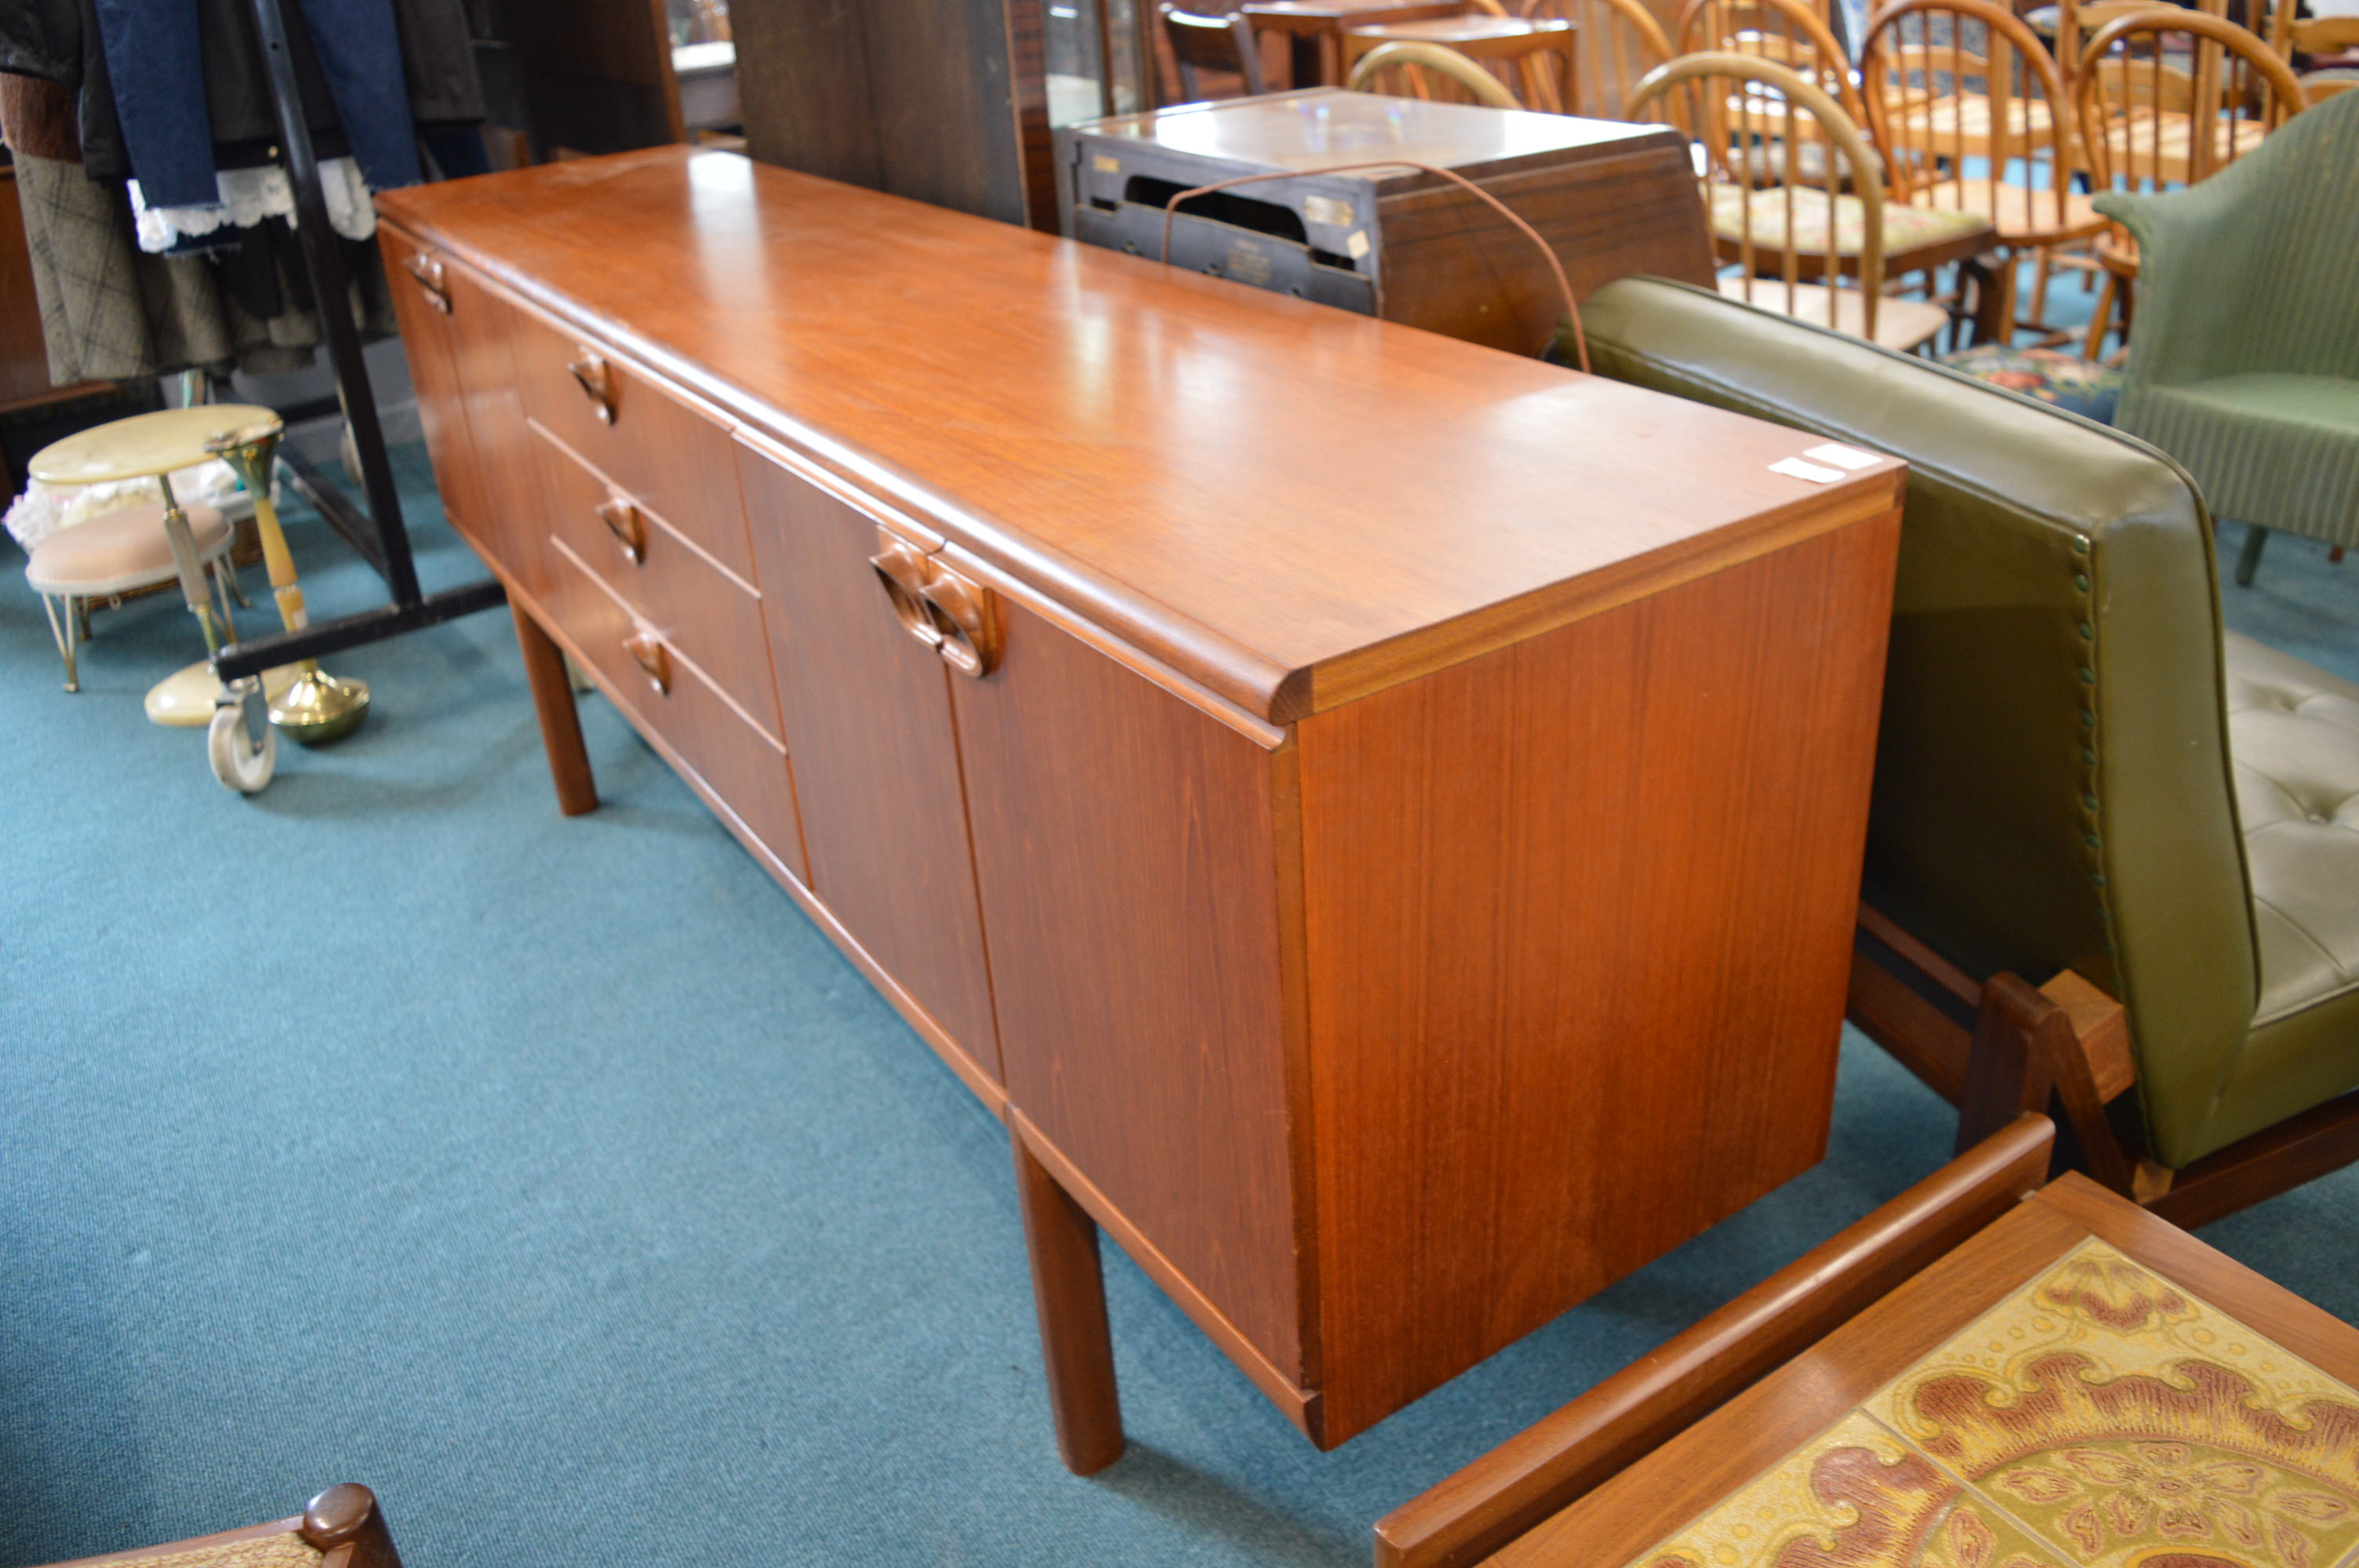 1970's Mcintosh Teak Sideboard with Three Drawers and Four Doors - Image 2 of 3